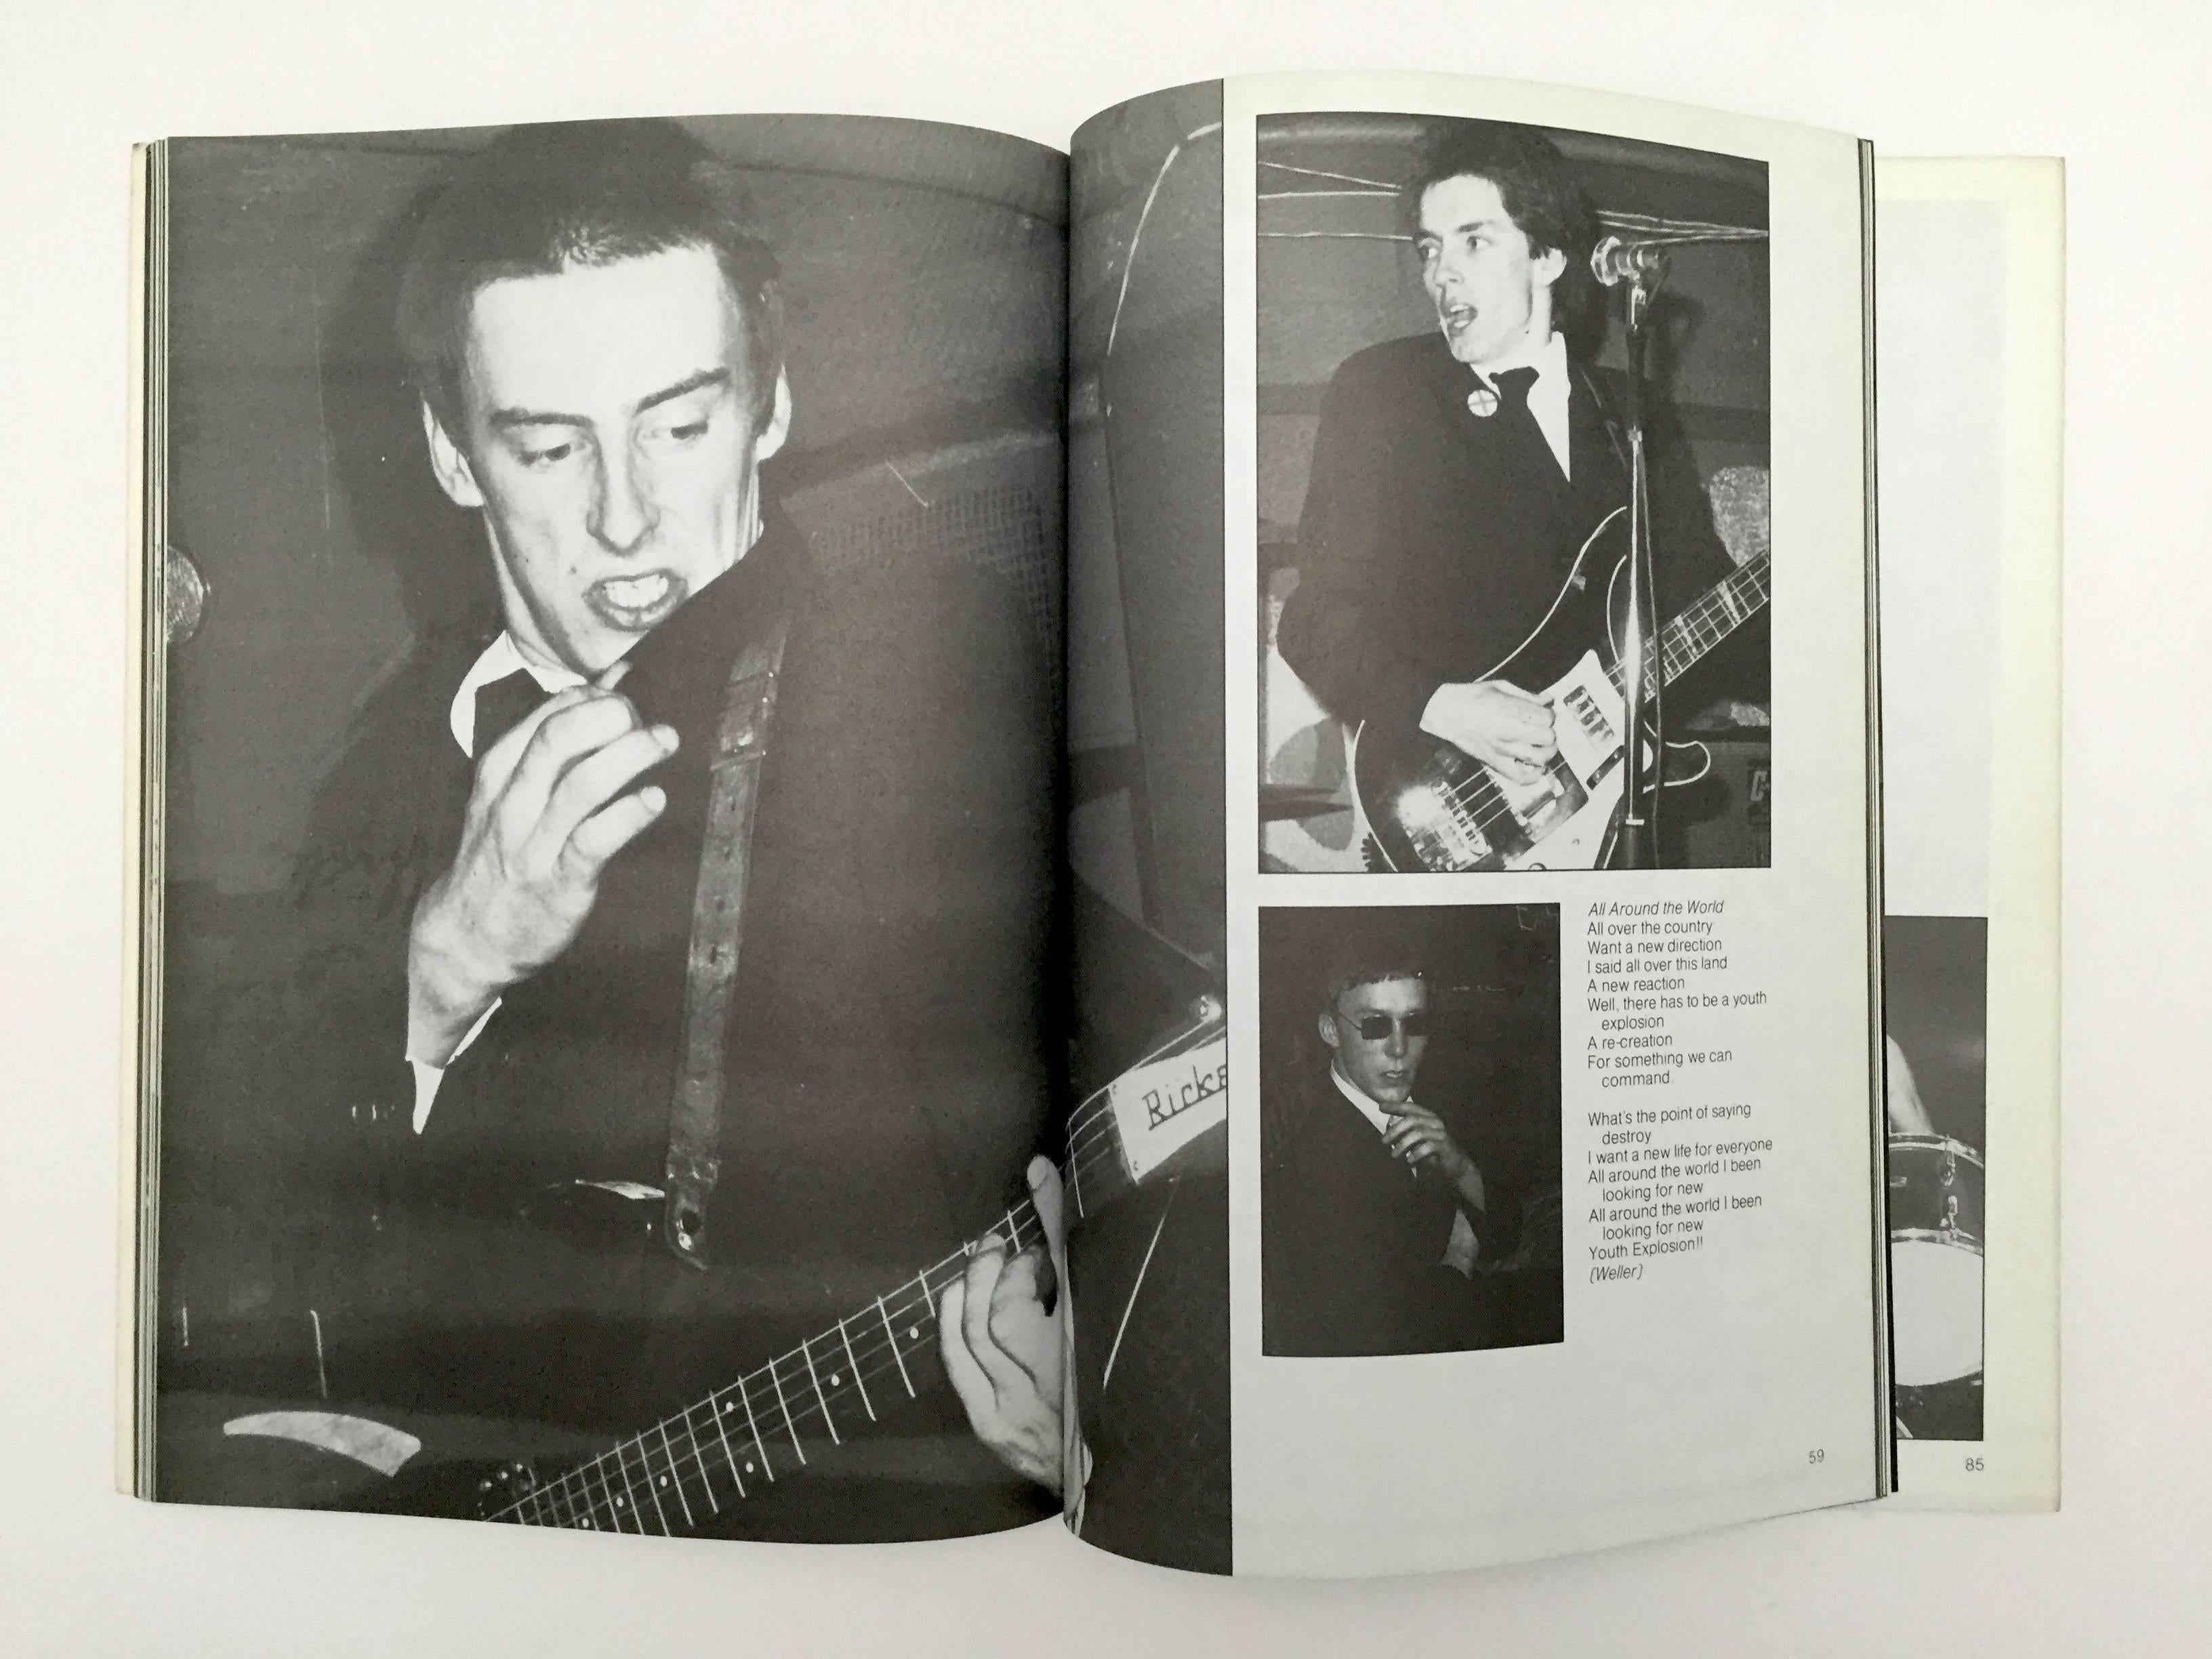 Plexus Publishing Ltd - 1978.

One of the classic punk photobooks, with text by Virginia Boston and an introduction by Danny Baker and photos by Derek Ridgers, Ray Stevenson, Mick Rock, Erica Echenberg, Kevin Cummins, Bob Gruen and many more. The